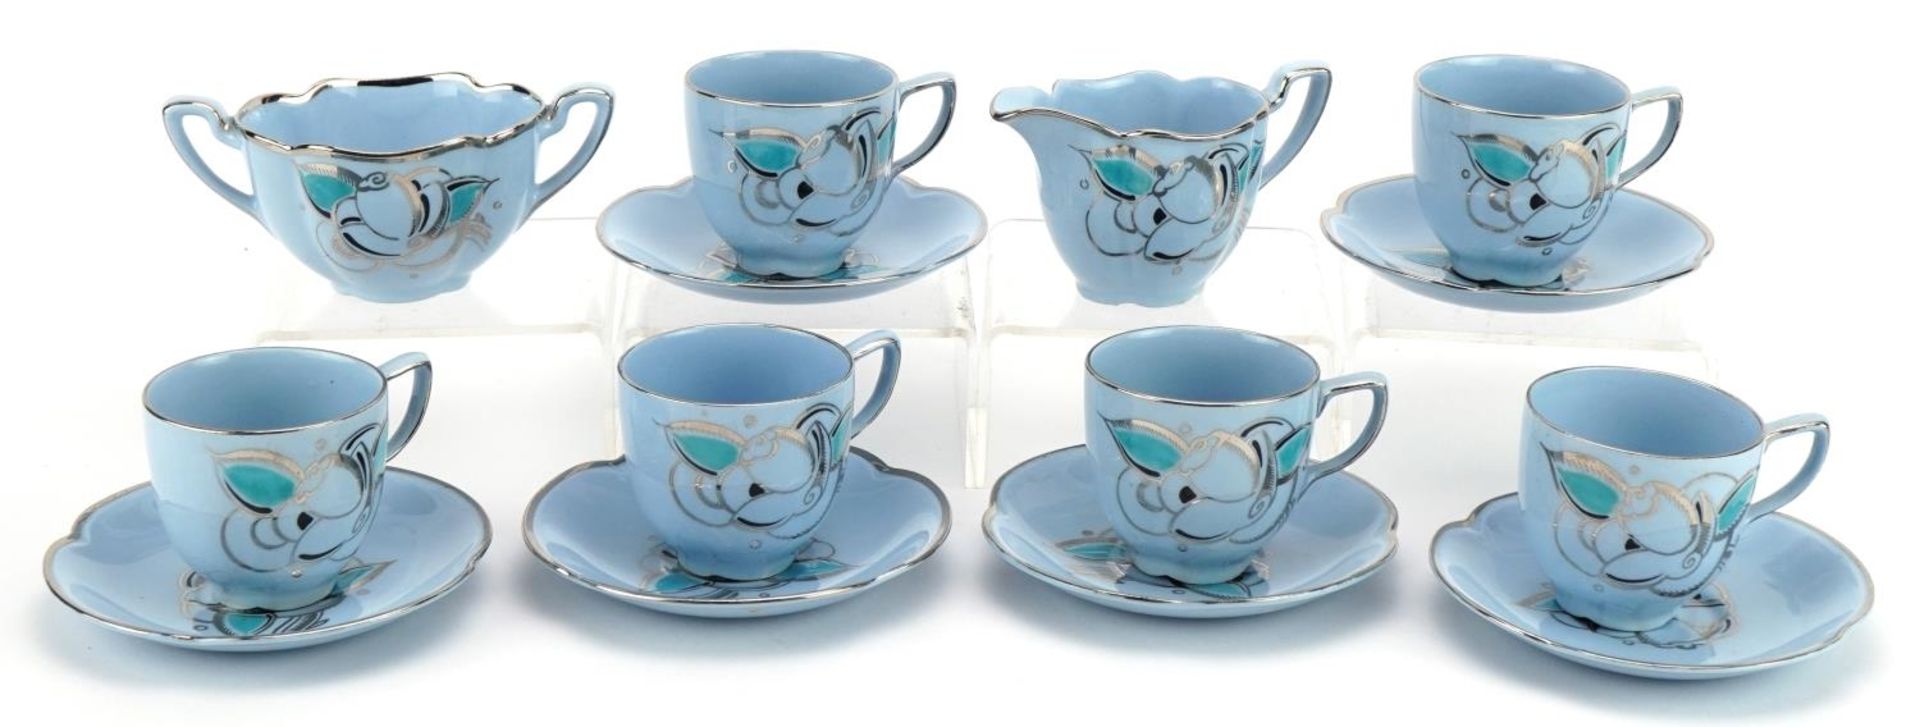 Susie Cooper for Greys, Art Deco six place tea service decorated with stylised flowers, the